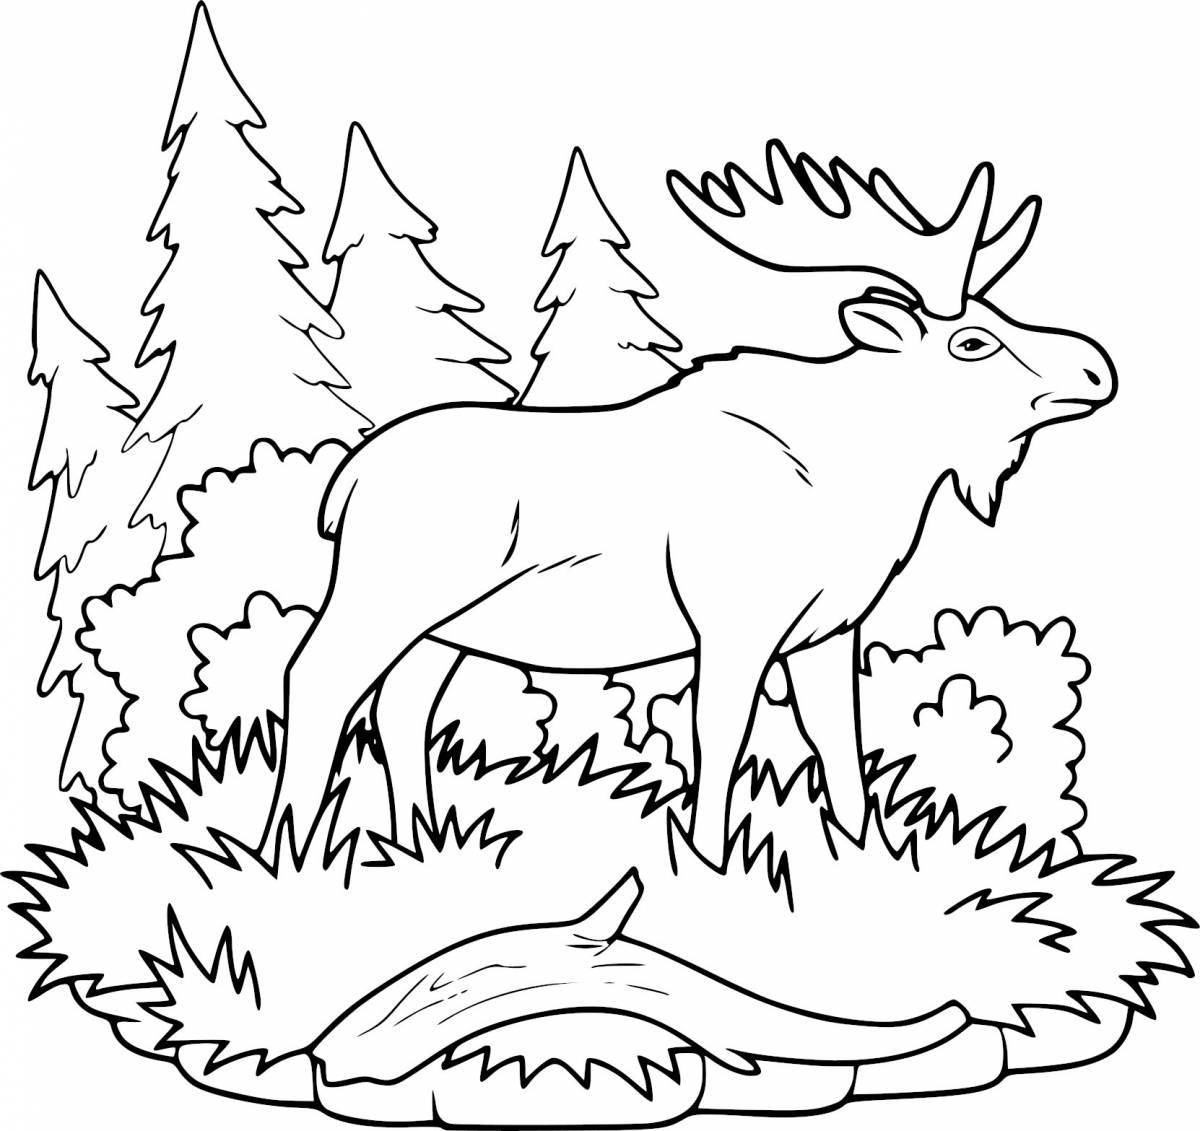 Flawless Moose coloring book for 6-7 year olds